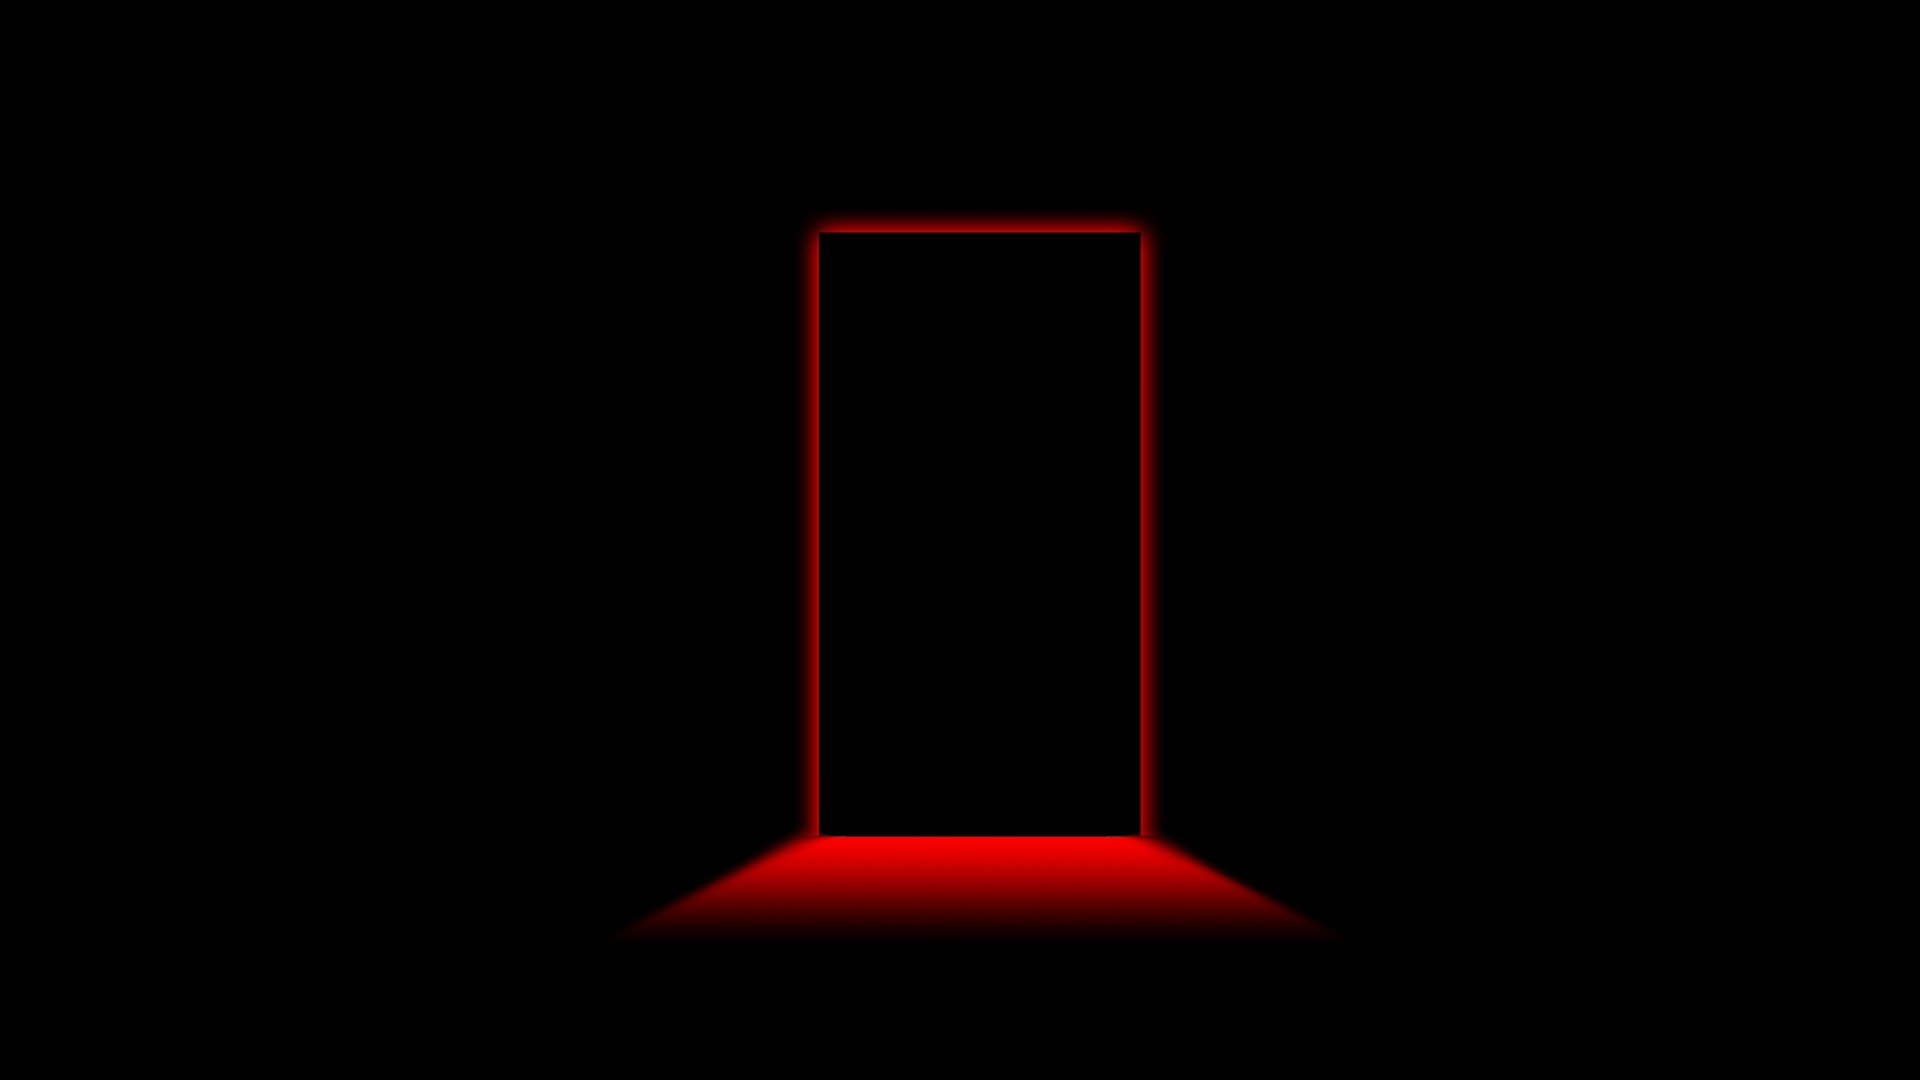 1920x1080, Tags - Red And Black Door - HD Wallpaper 